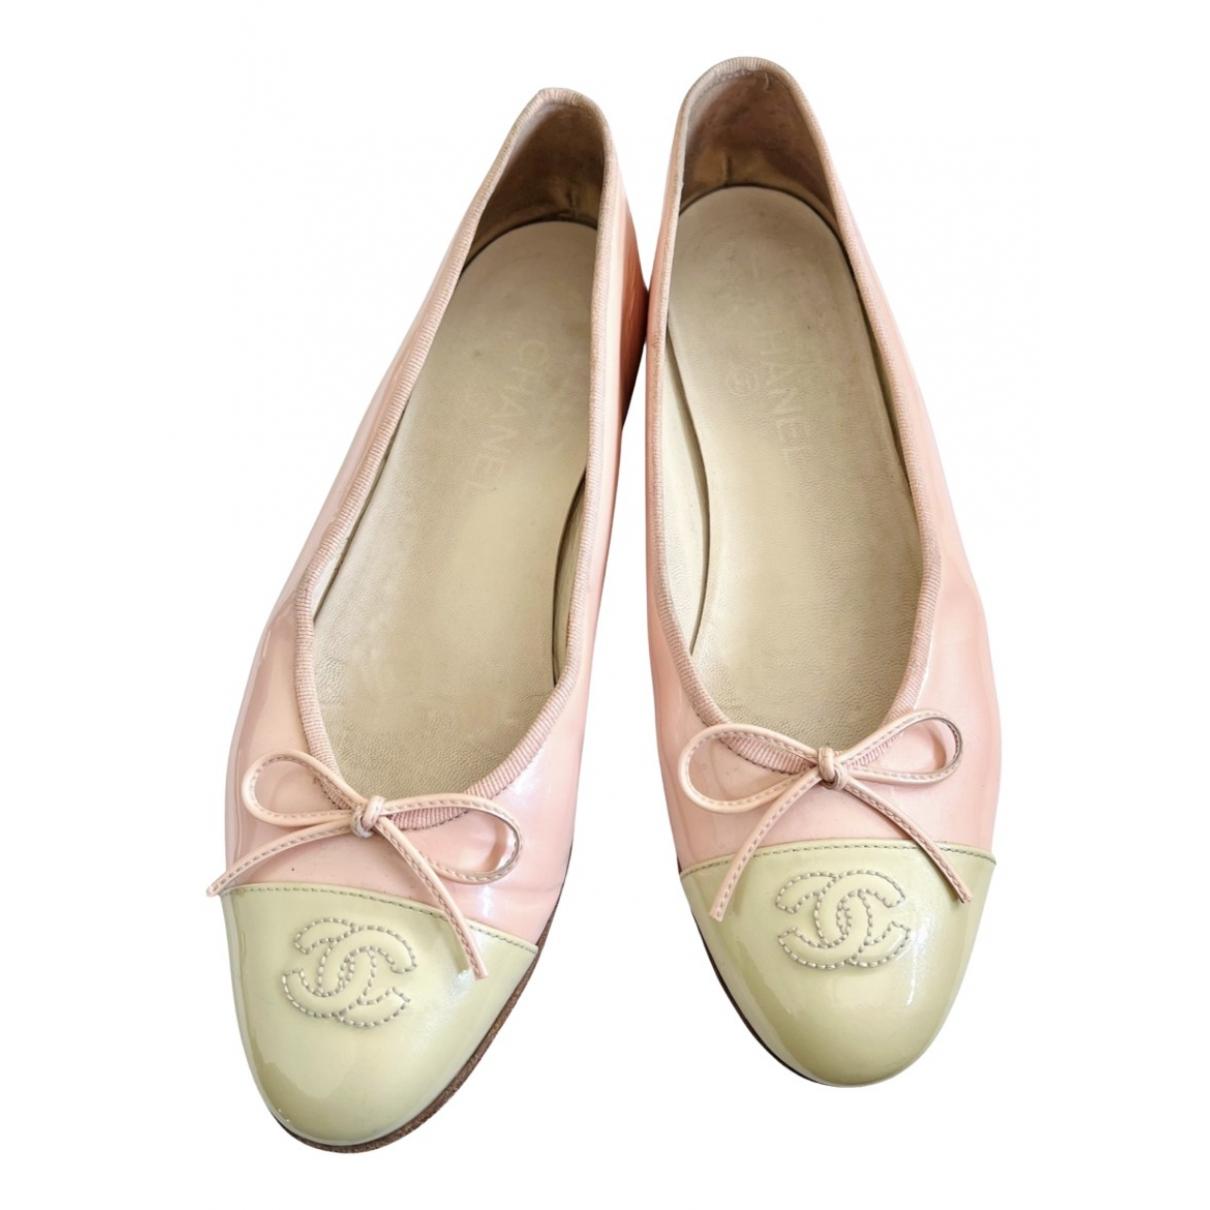 Patent leather ballet flats Chanel Pink size 39.5 EU in Patent